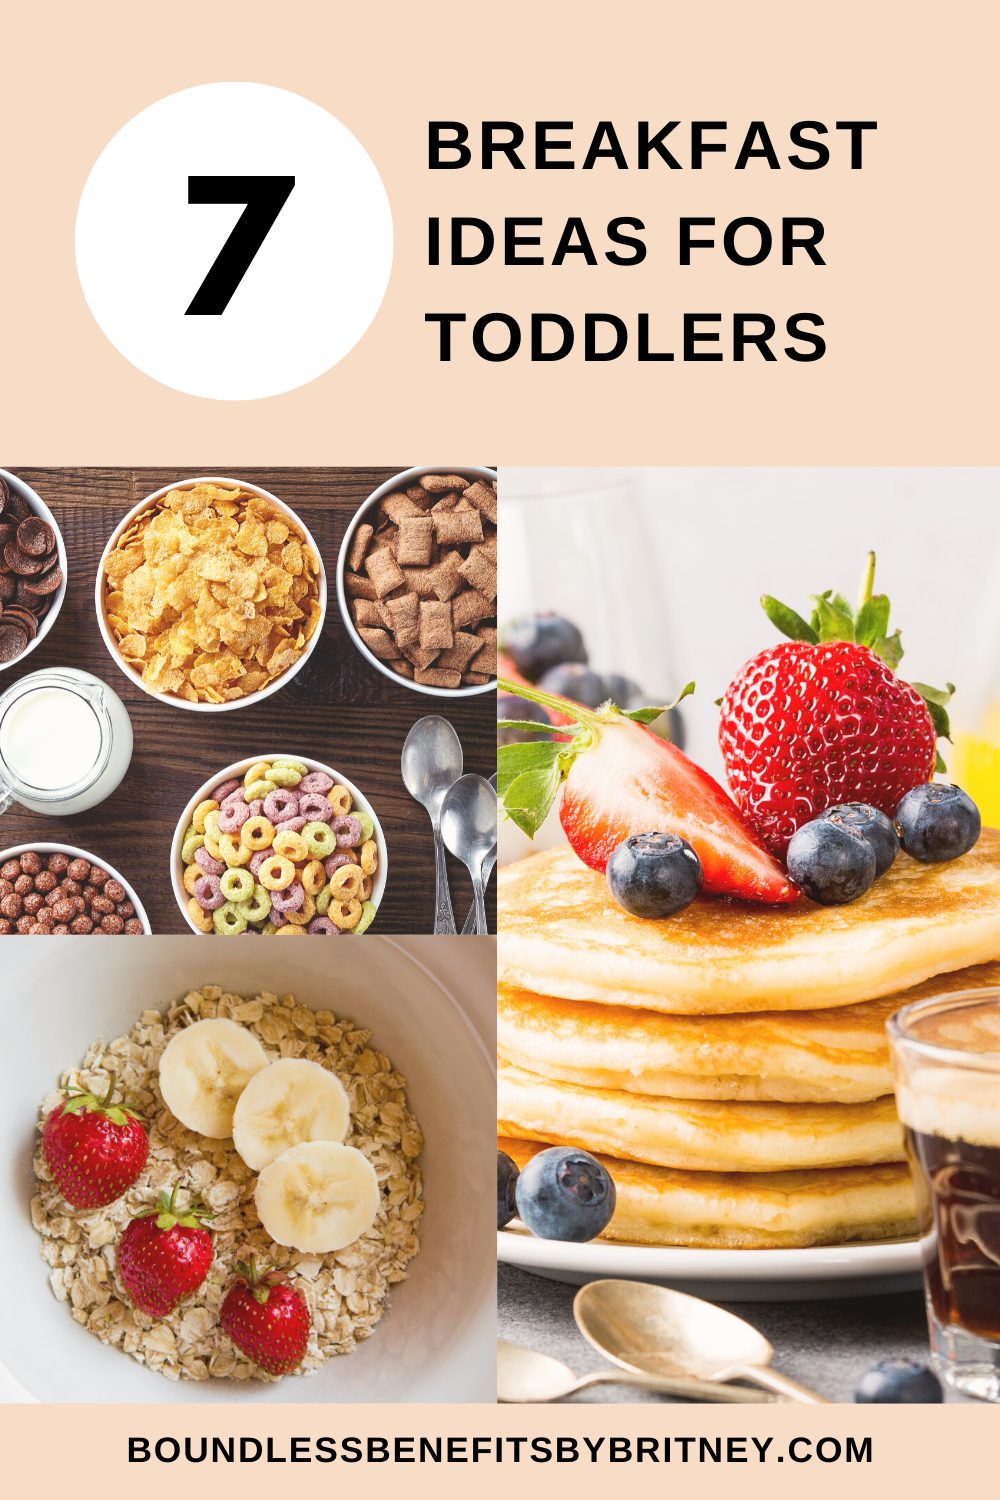 7 Breakfast Ideas for Toddlers - Boundless Benefits